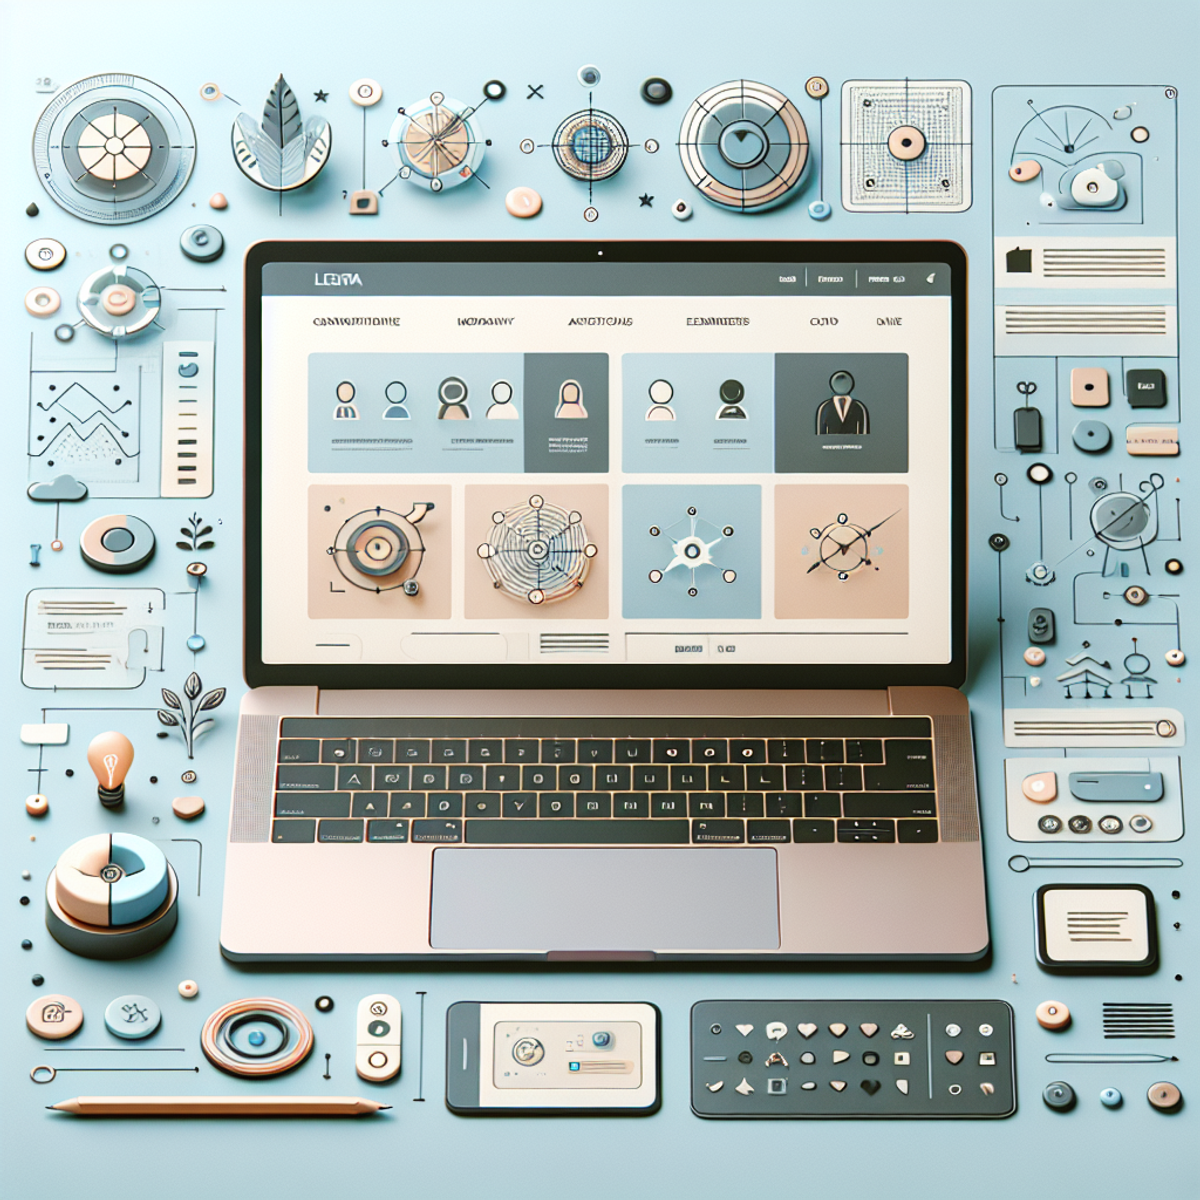 A laptop screen with a modern and clean website theme showcasing smooth lines, minimalistic icons, pastel color schemes, and carefully placed objects.